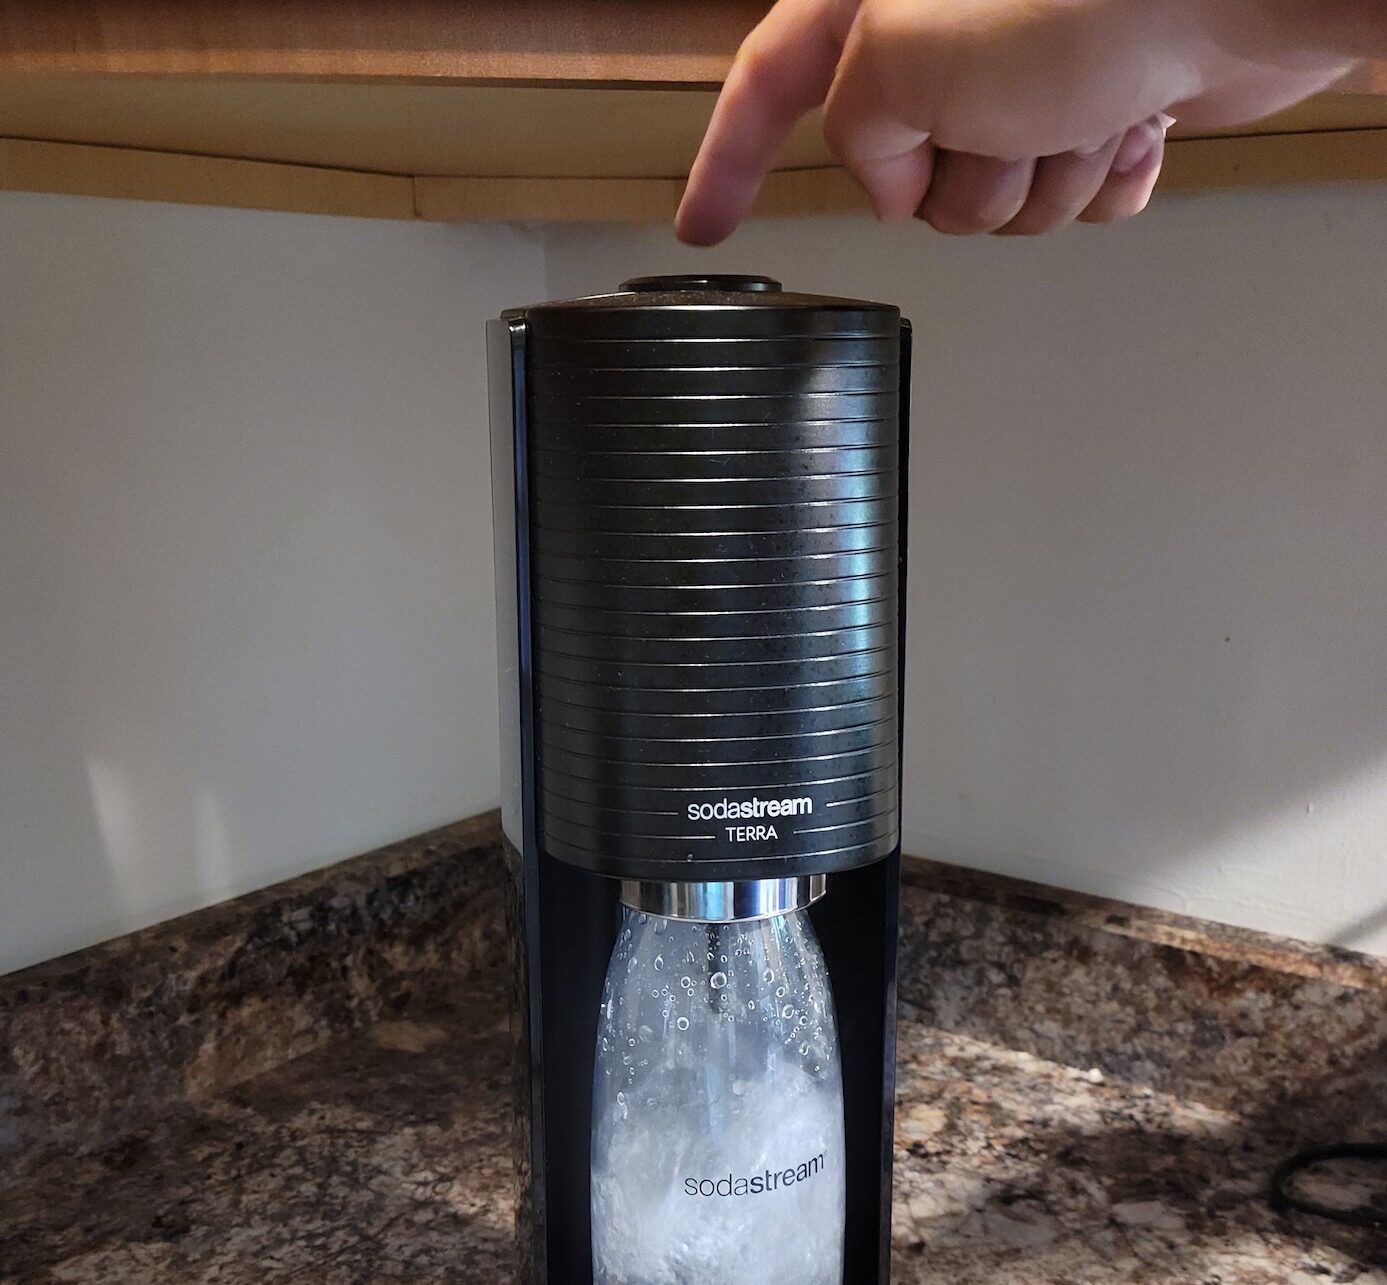 Person pressing button on SodaStream Terra for carbonation